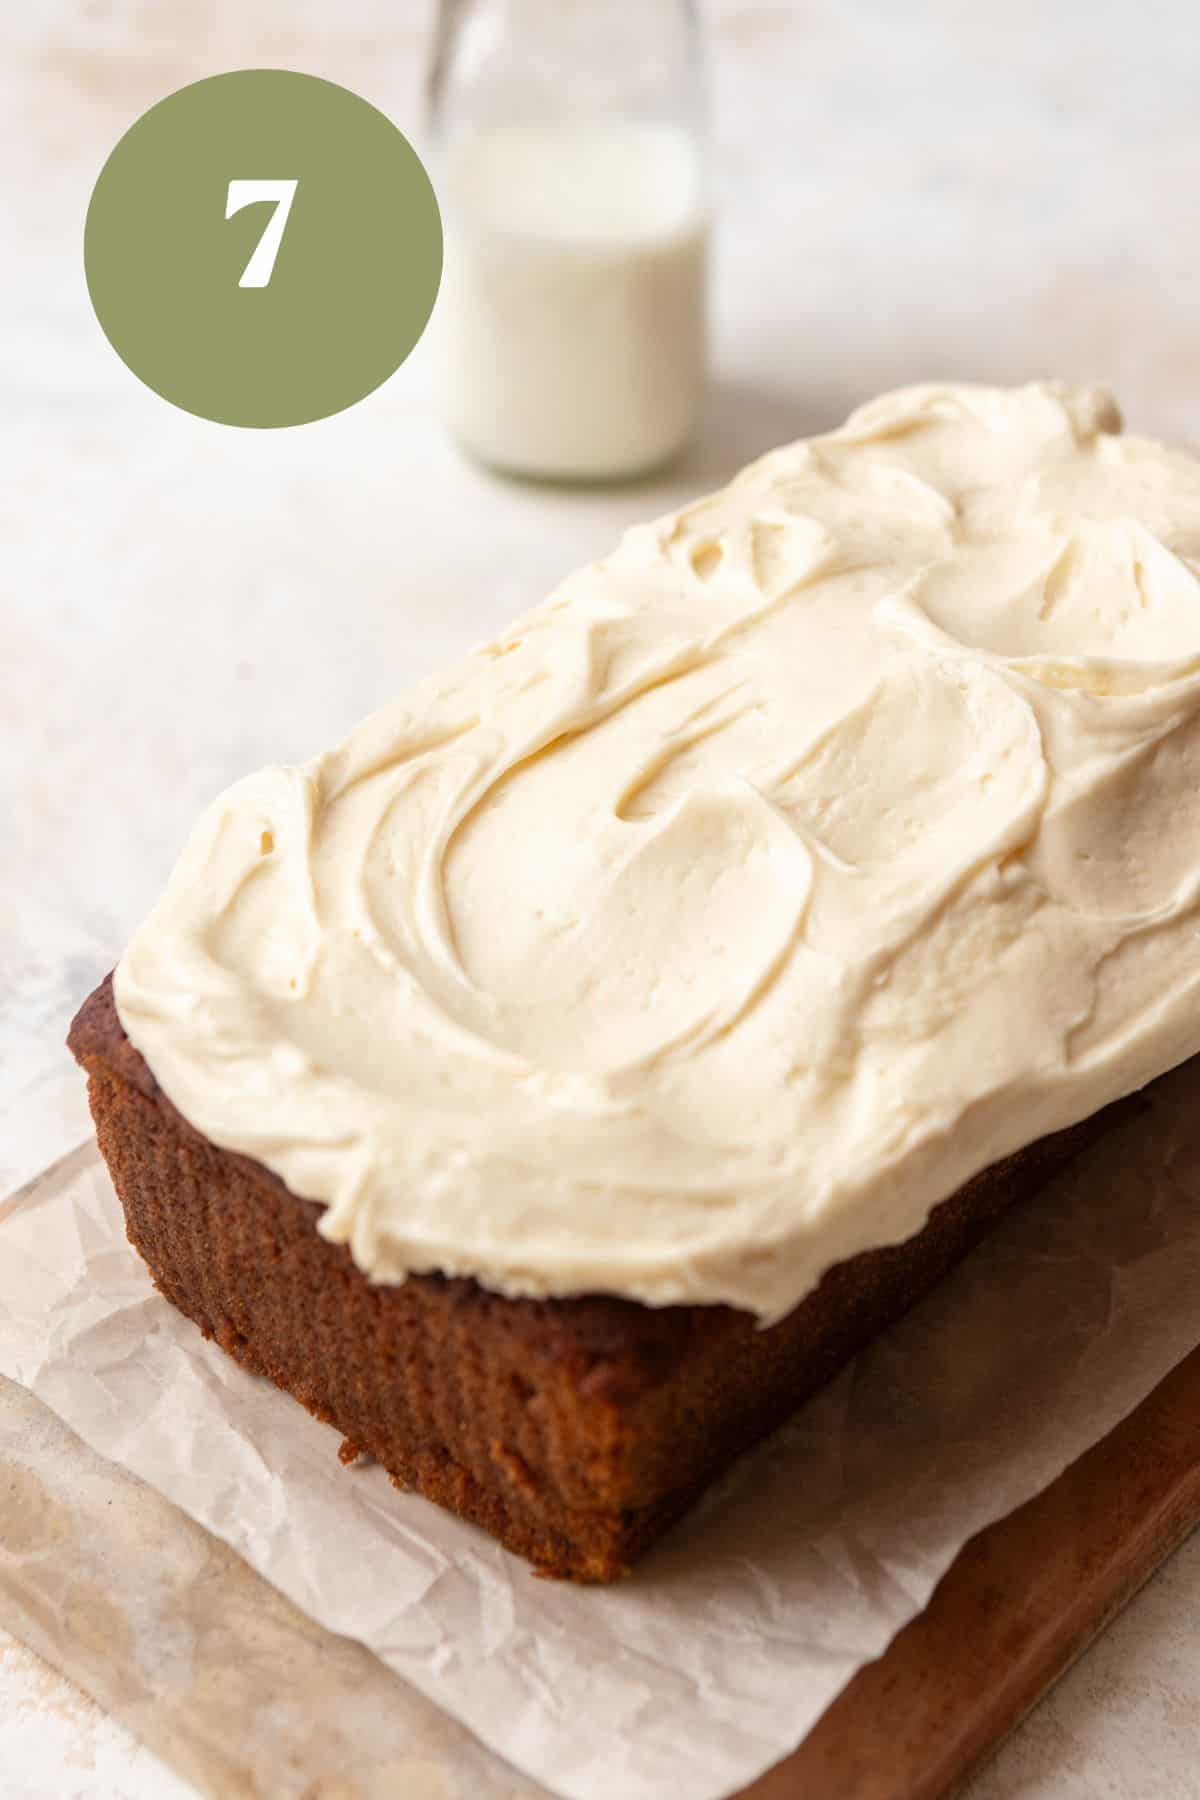 Banana bread with cream cheese frosting on a wood board.